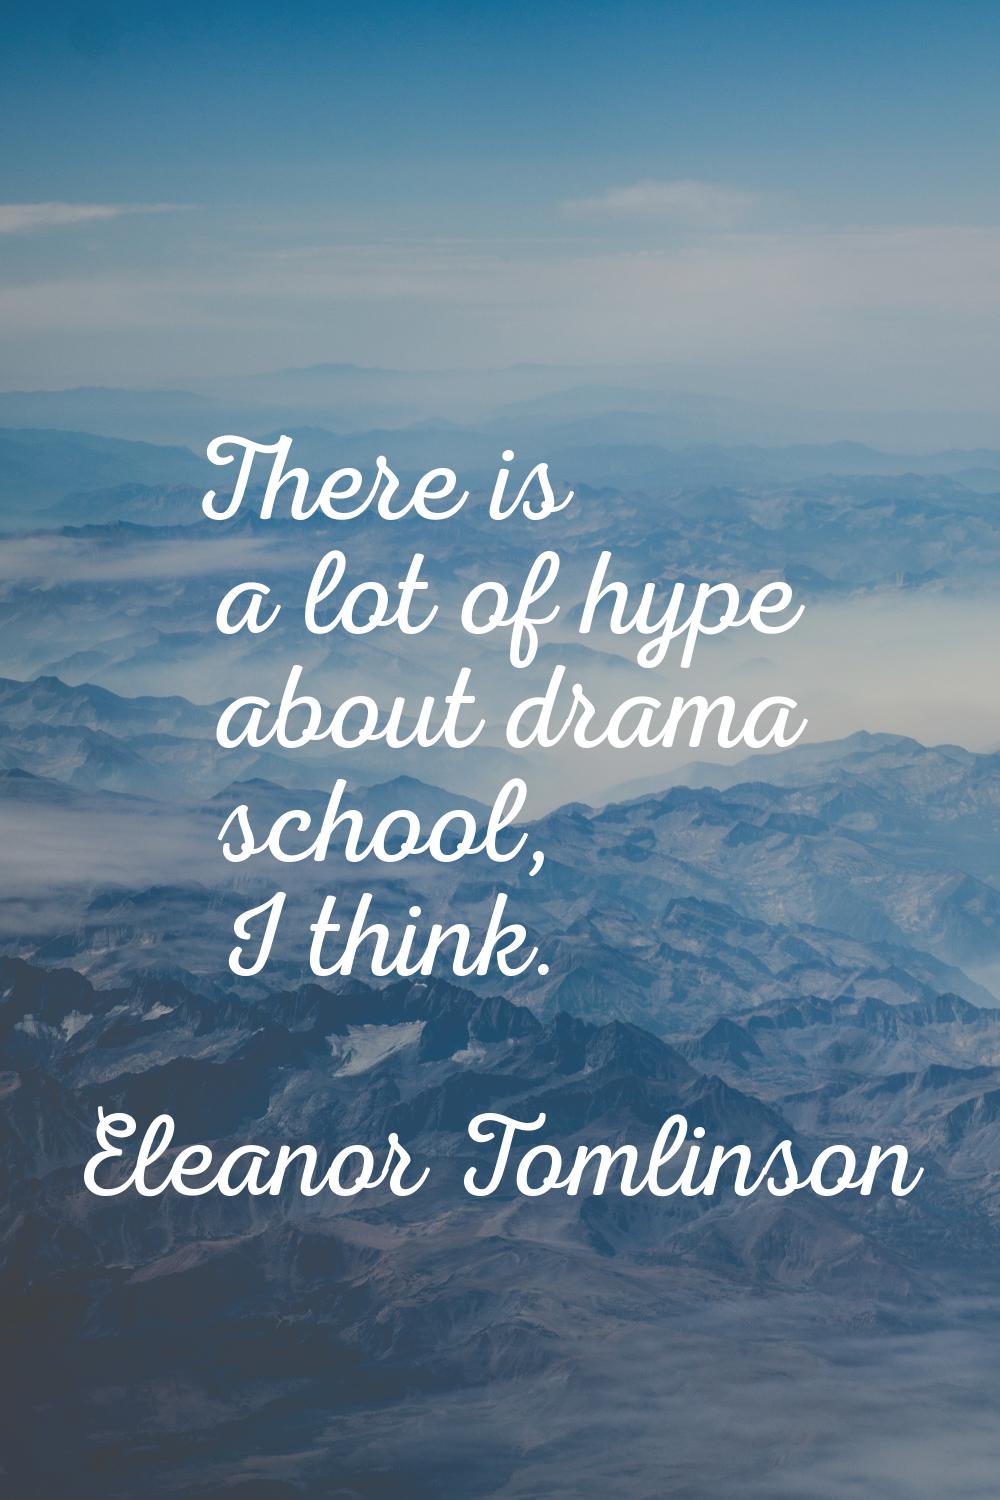 There is a lot of hype about drama school, I think.